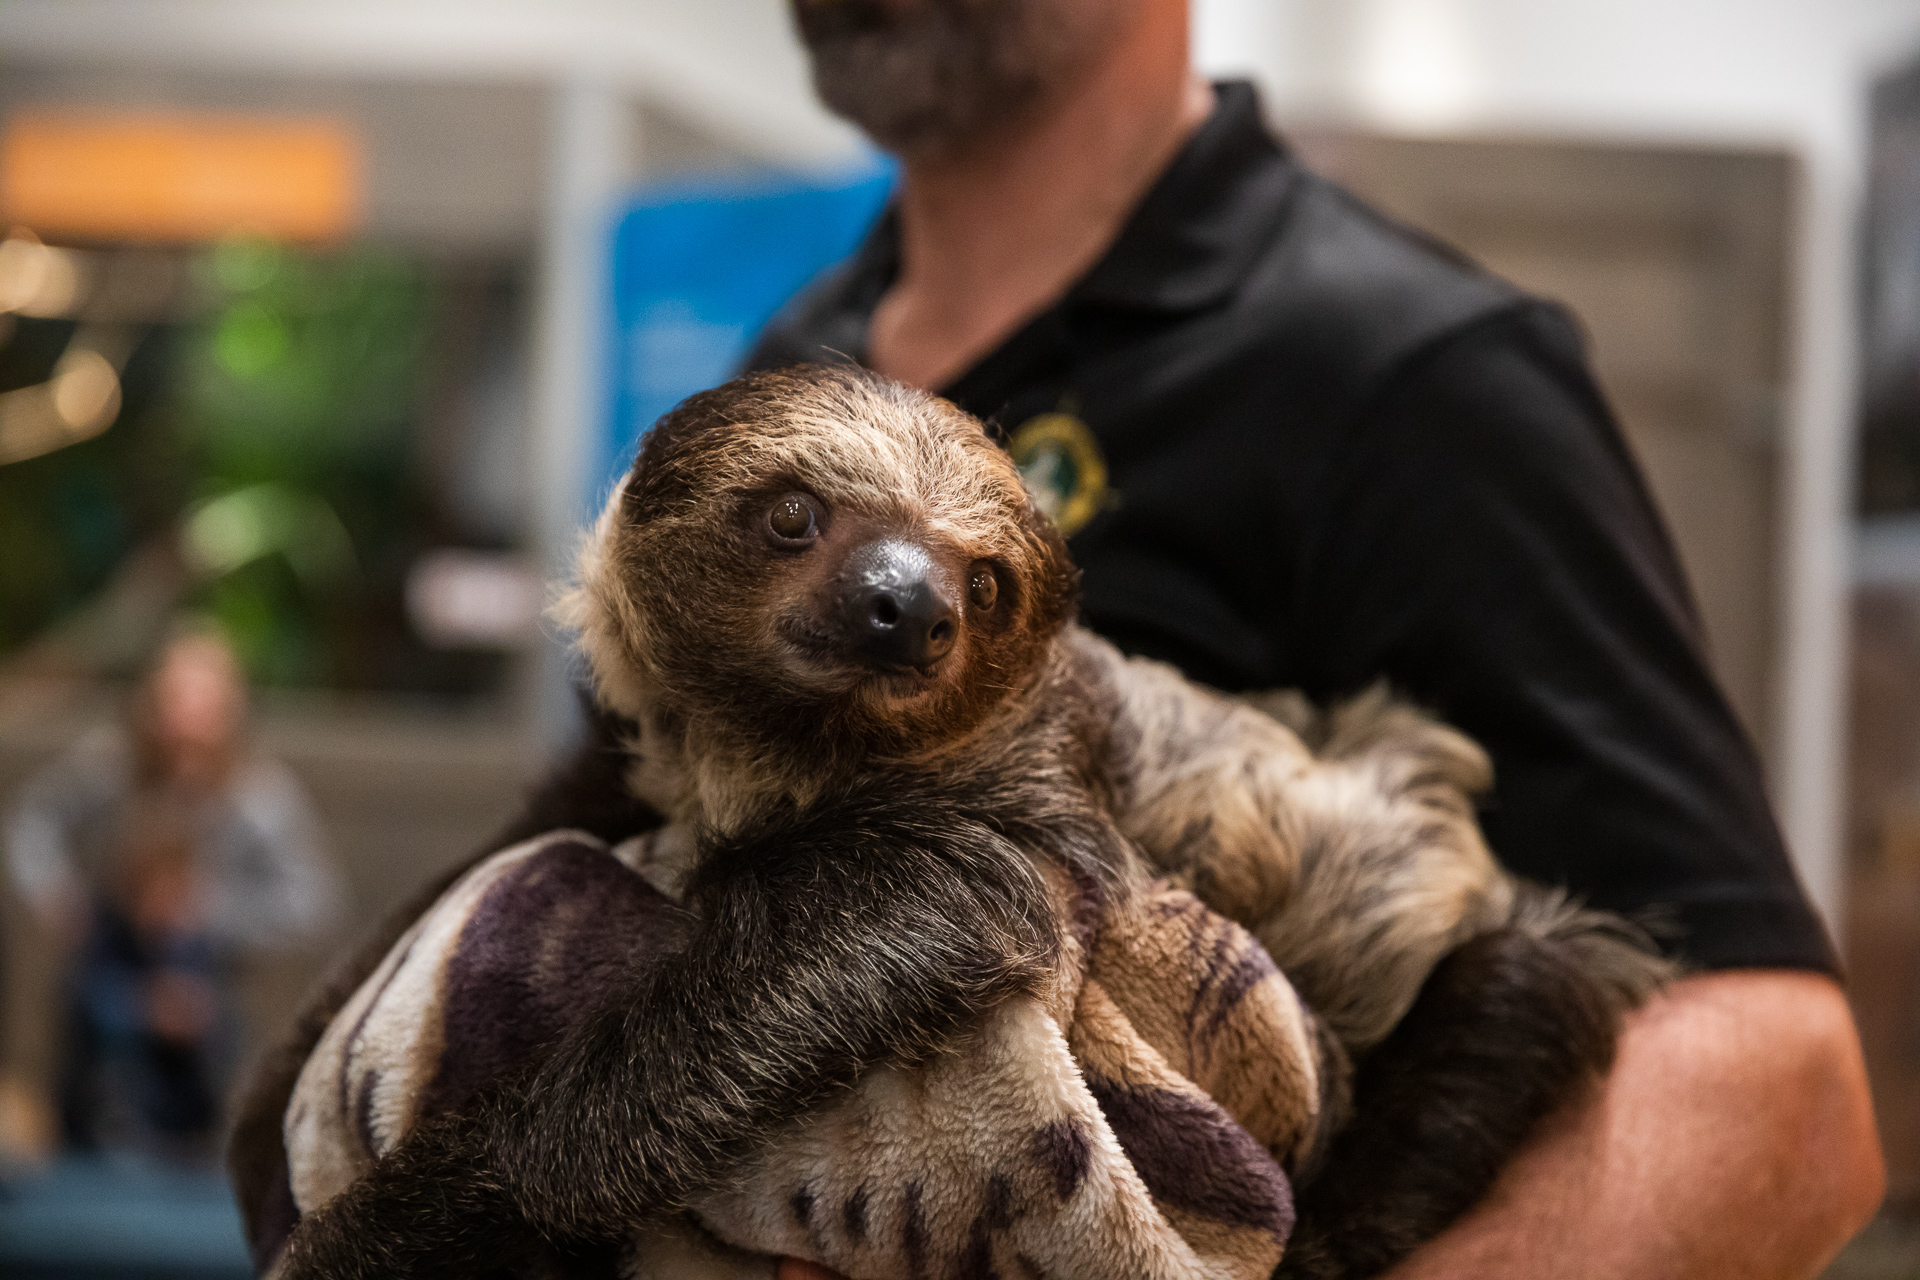 Roger the Sloth snuggles in his blanket like a little prince. Eagle photo by Paul Frangipane